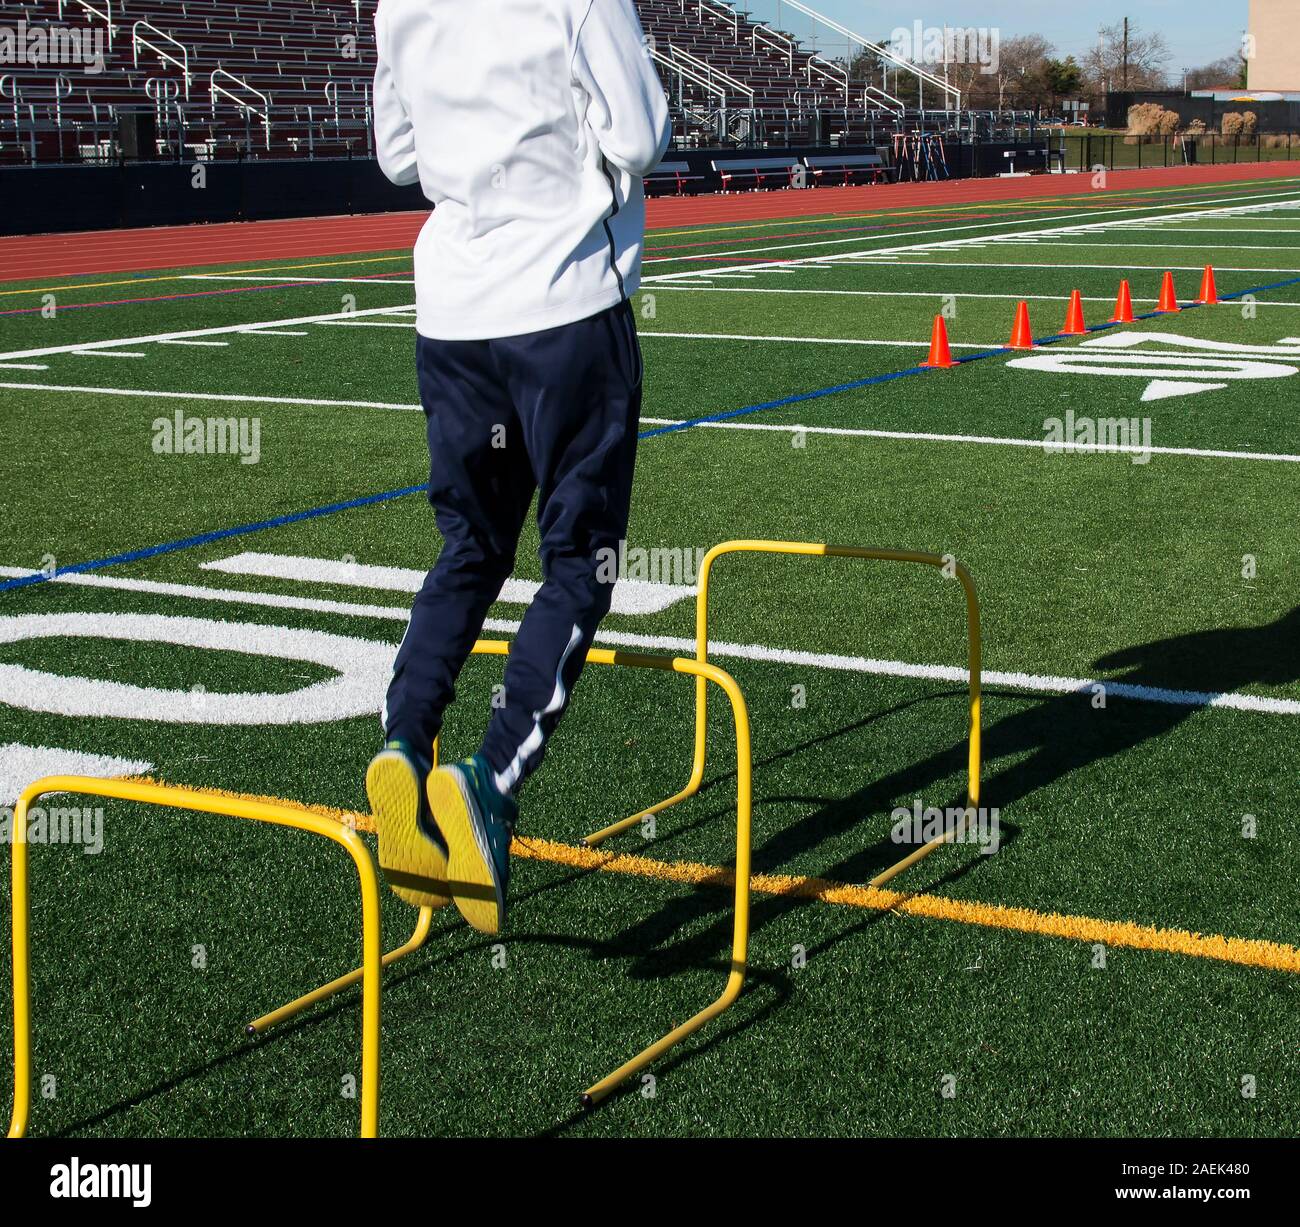 A track and field athlete jumping over yellow mini hurdles during cross training speed practice. Orange cones are in the background for running over. Stock Photo